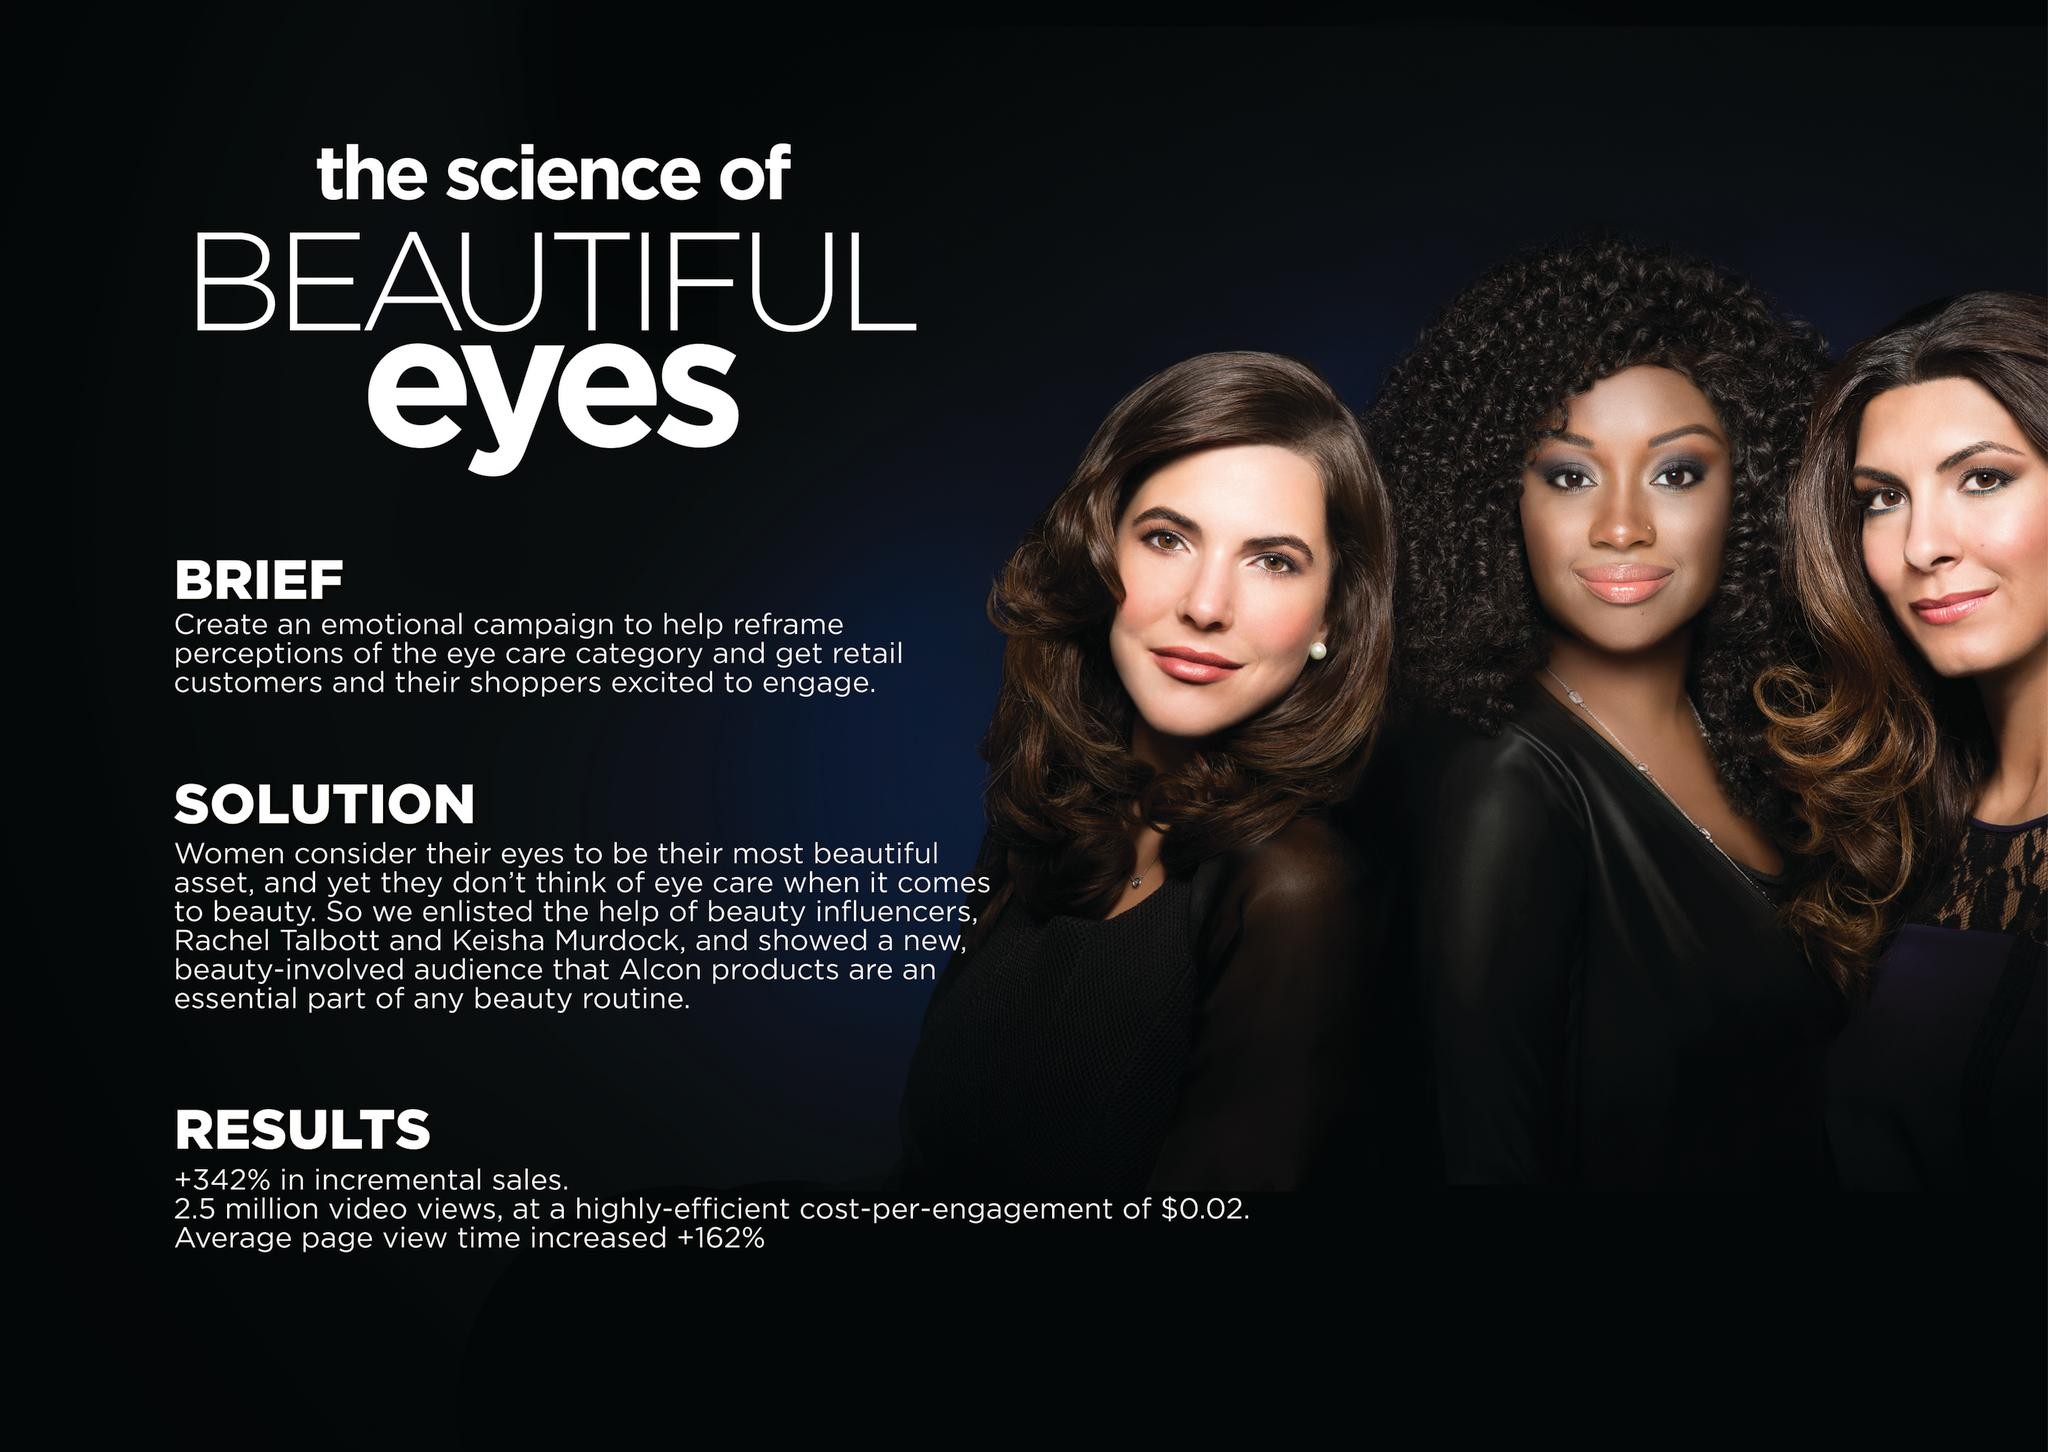 The Science of Beautiful Eyes